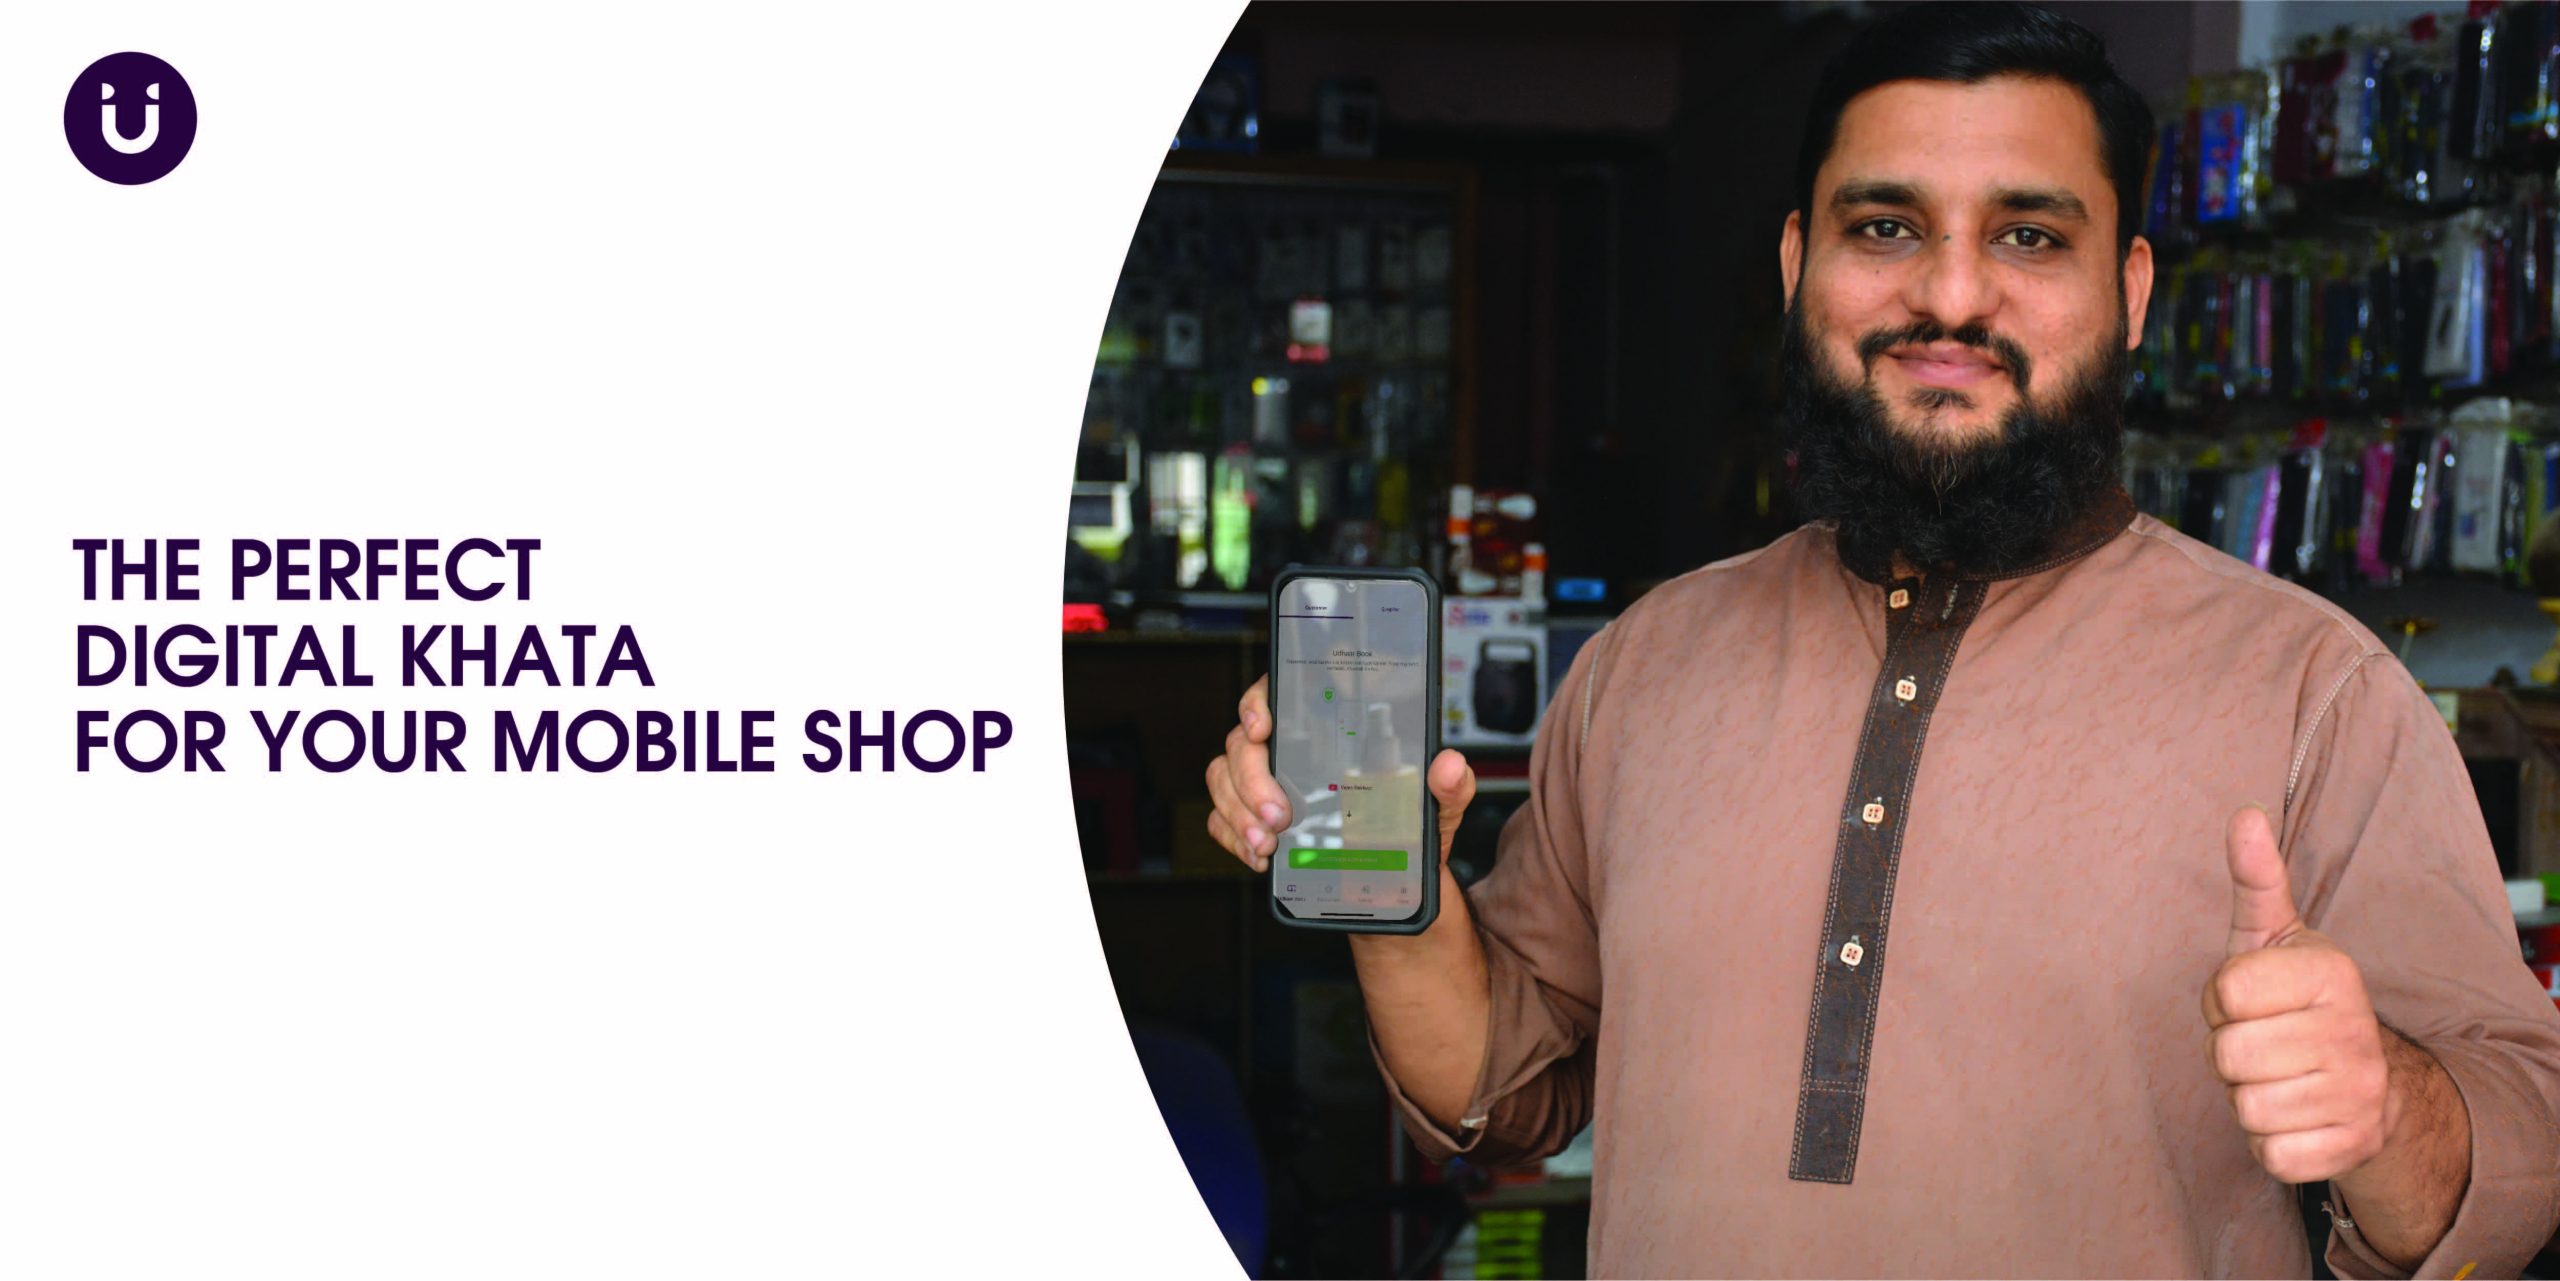 The Perfect Digital Khata for your Mobile Shop